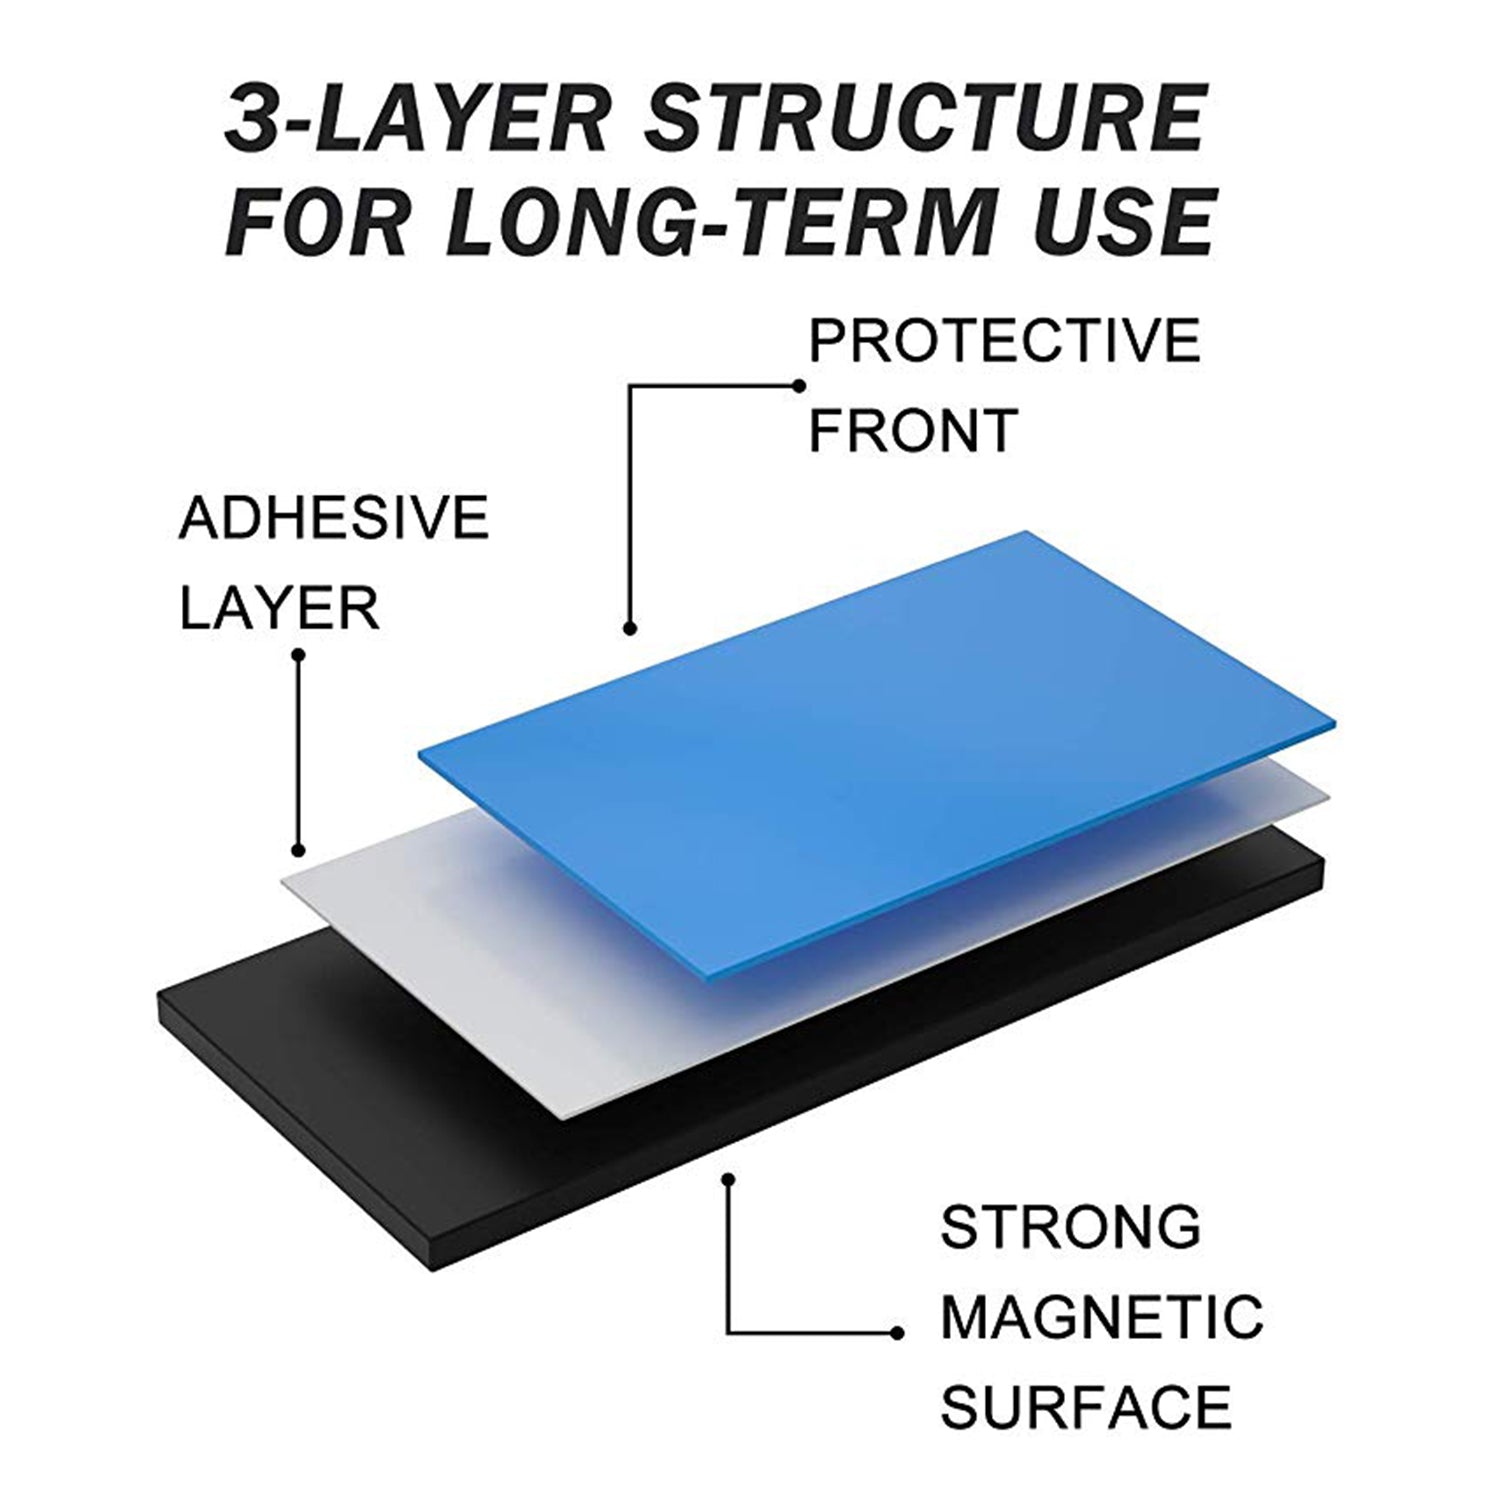 Flexible Magnetic Sheets with Adhesive (2pk)